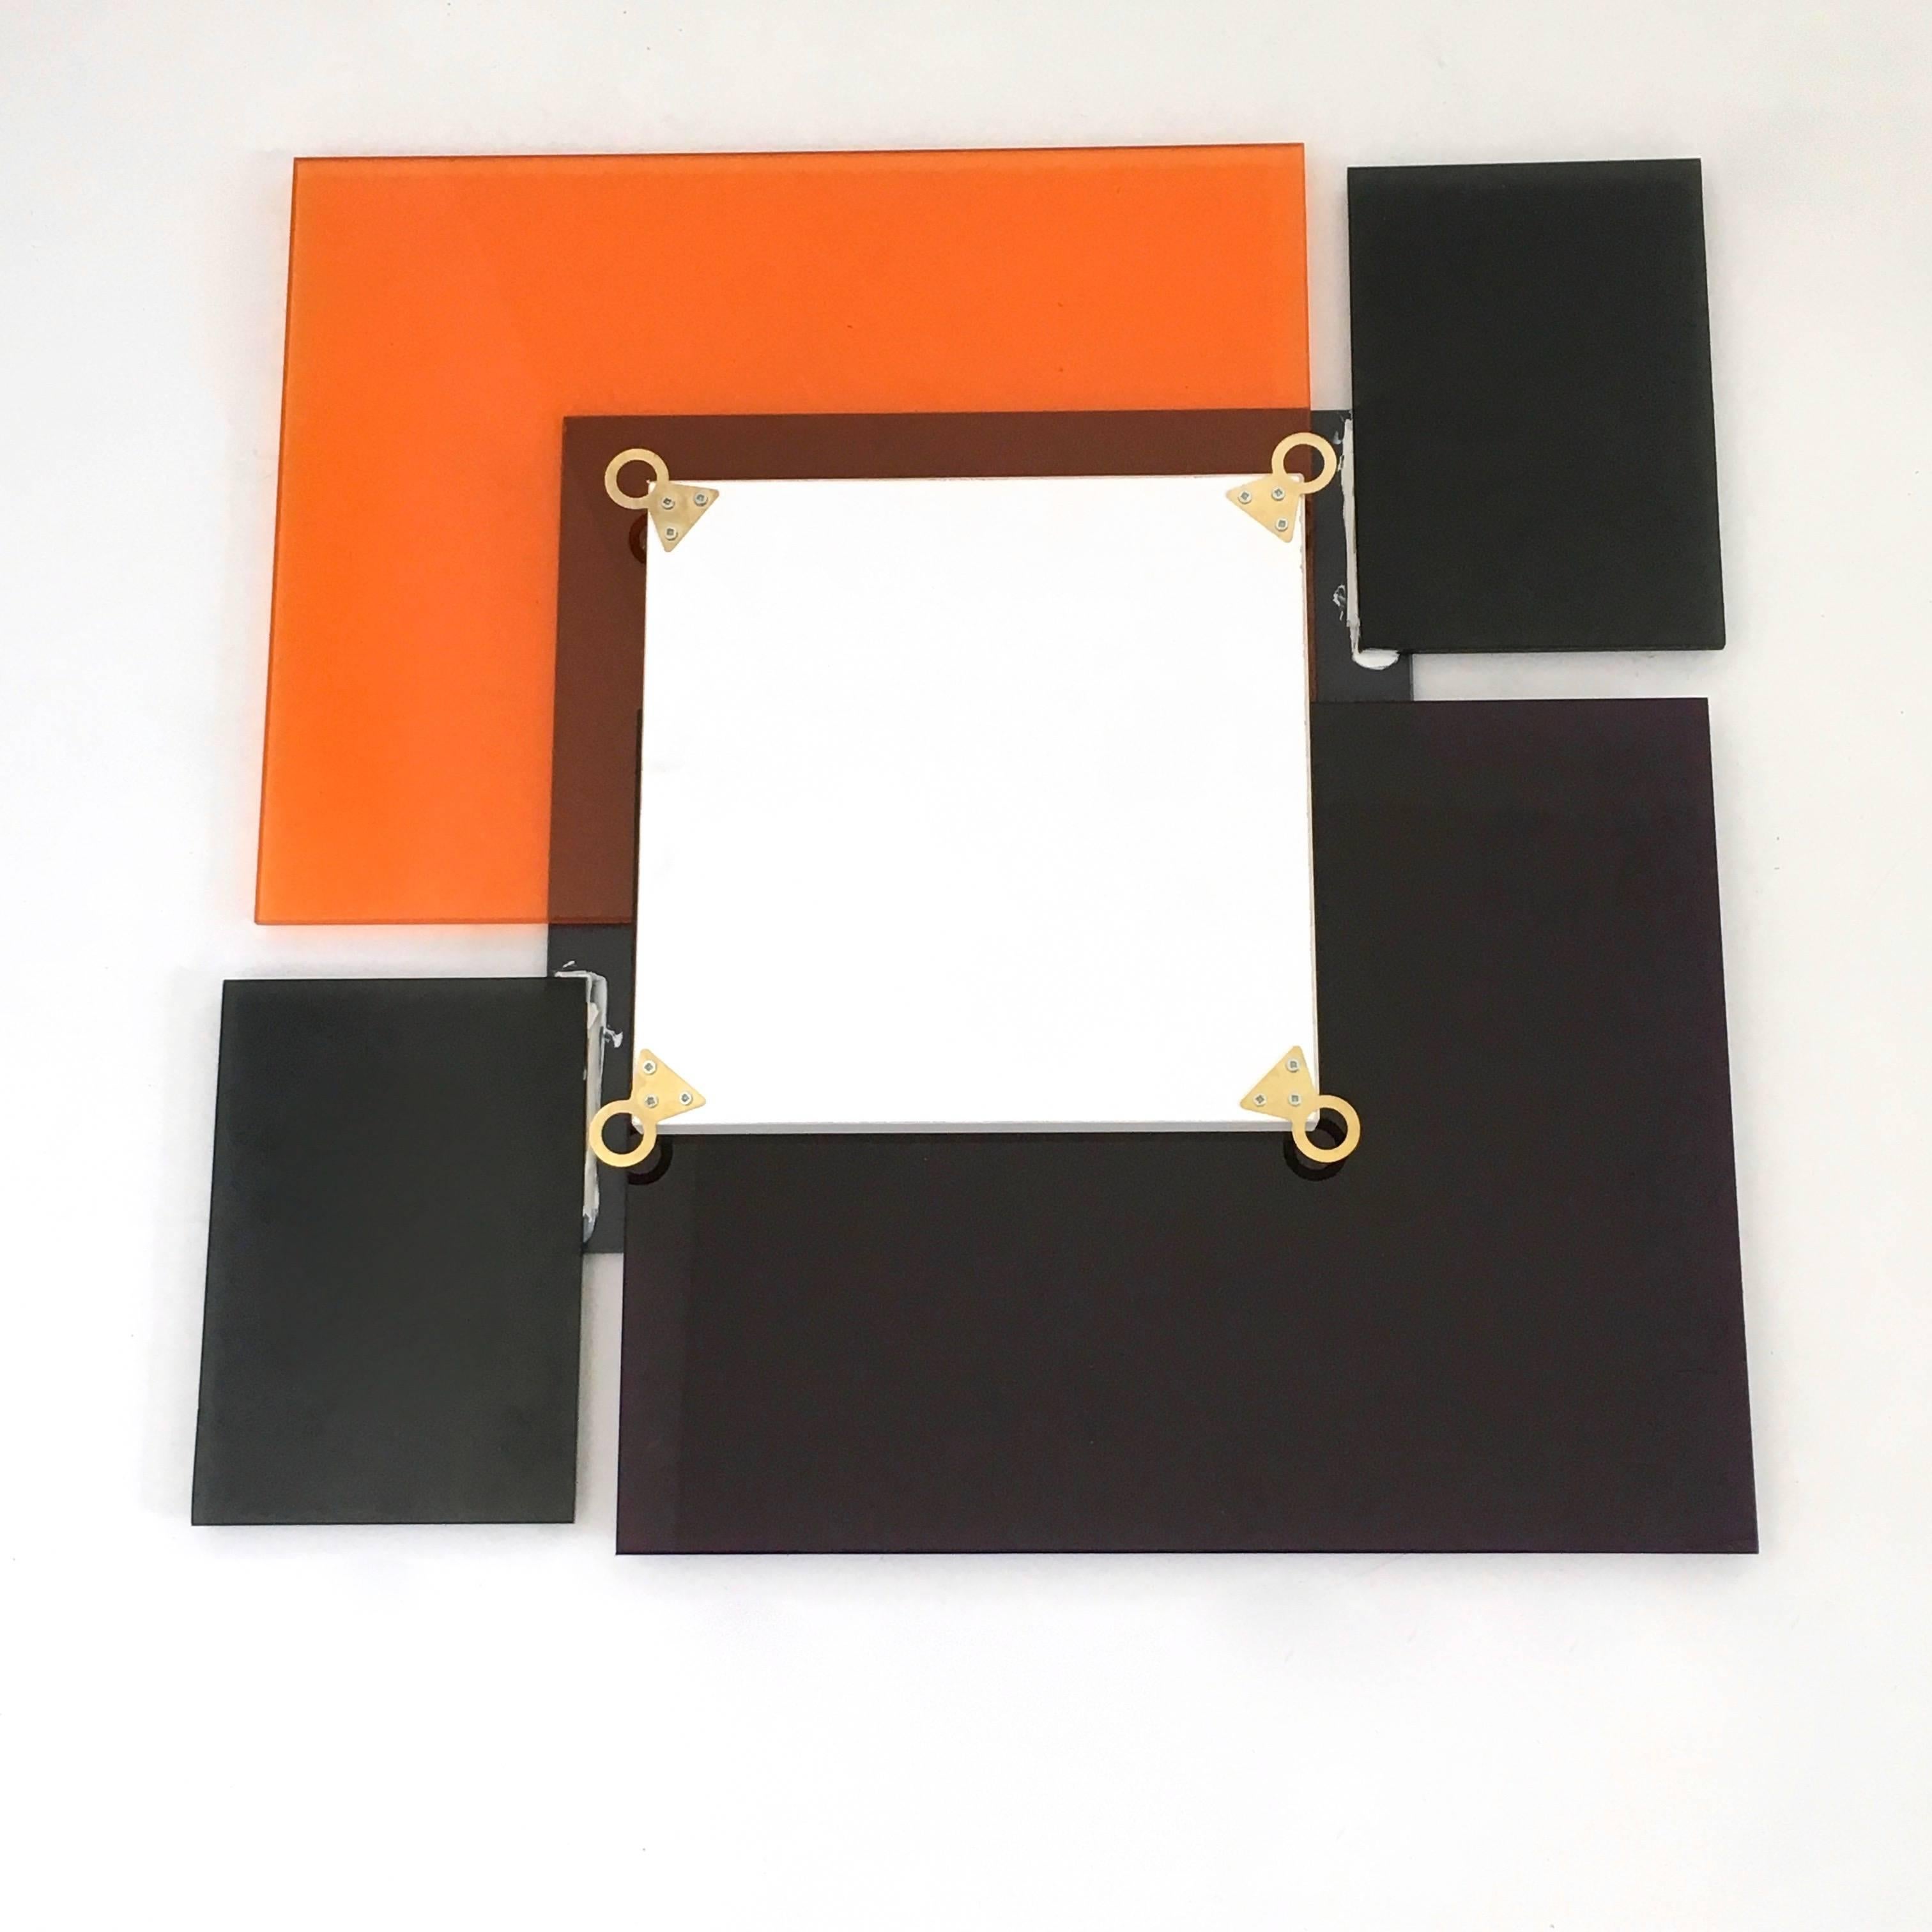 Pair of Postmodern Black and Orange Wall Mirrors in the Style of Sottsass, 1980s For Sale 6